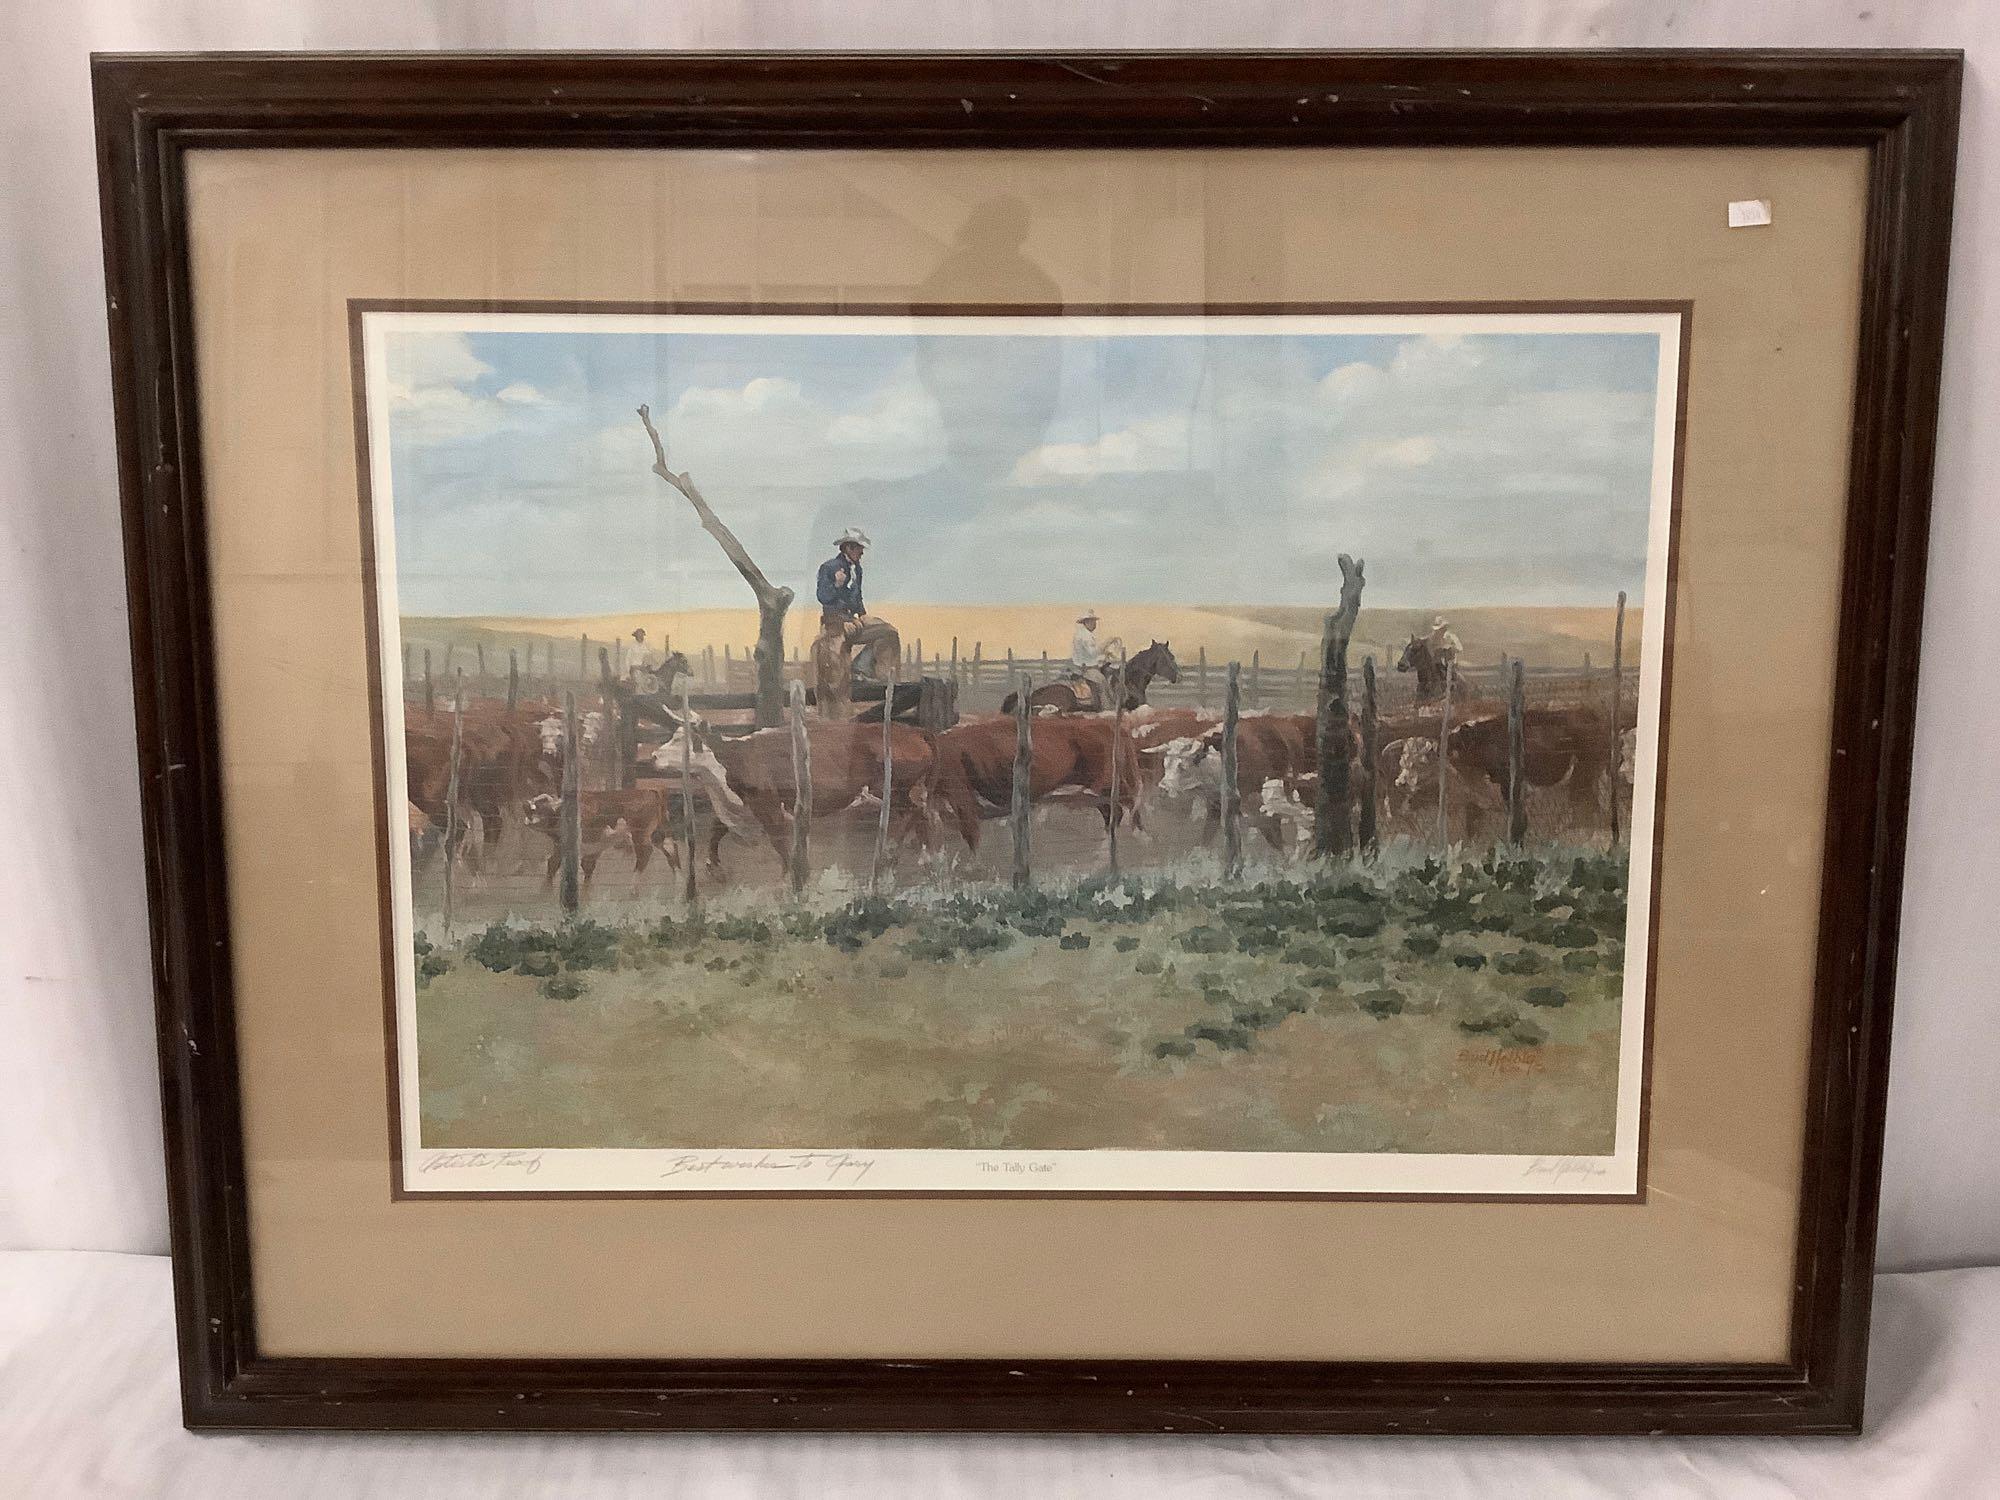 Vintage framed artist proof print, signed & inscribed by artist - The Tally Gate by Bud Helbig